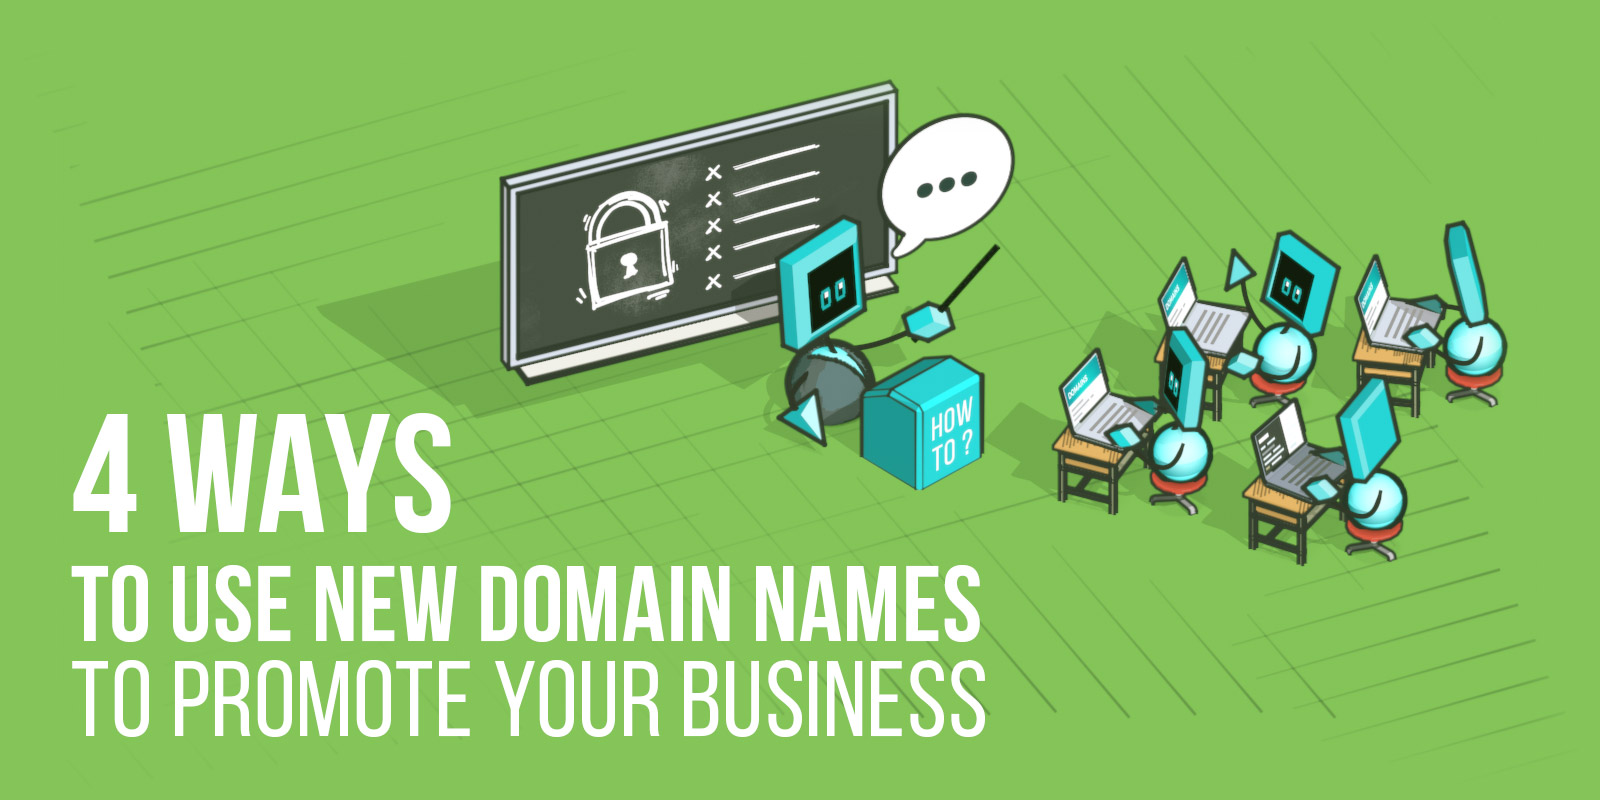 4 Ways To Use New Domain Names To Promote Your Business